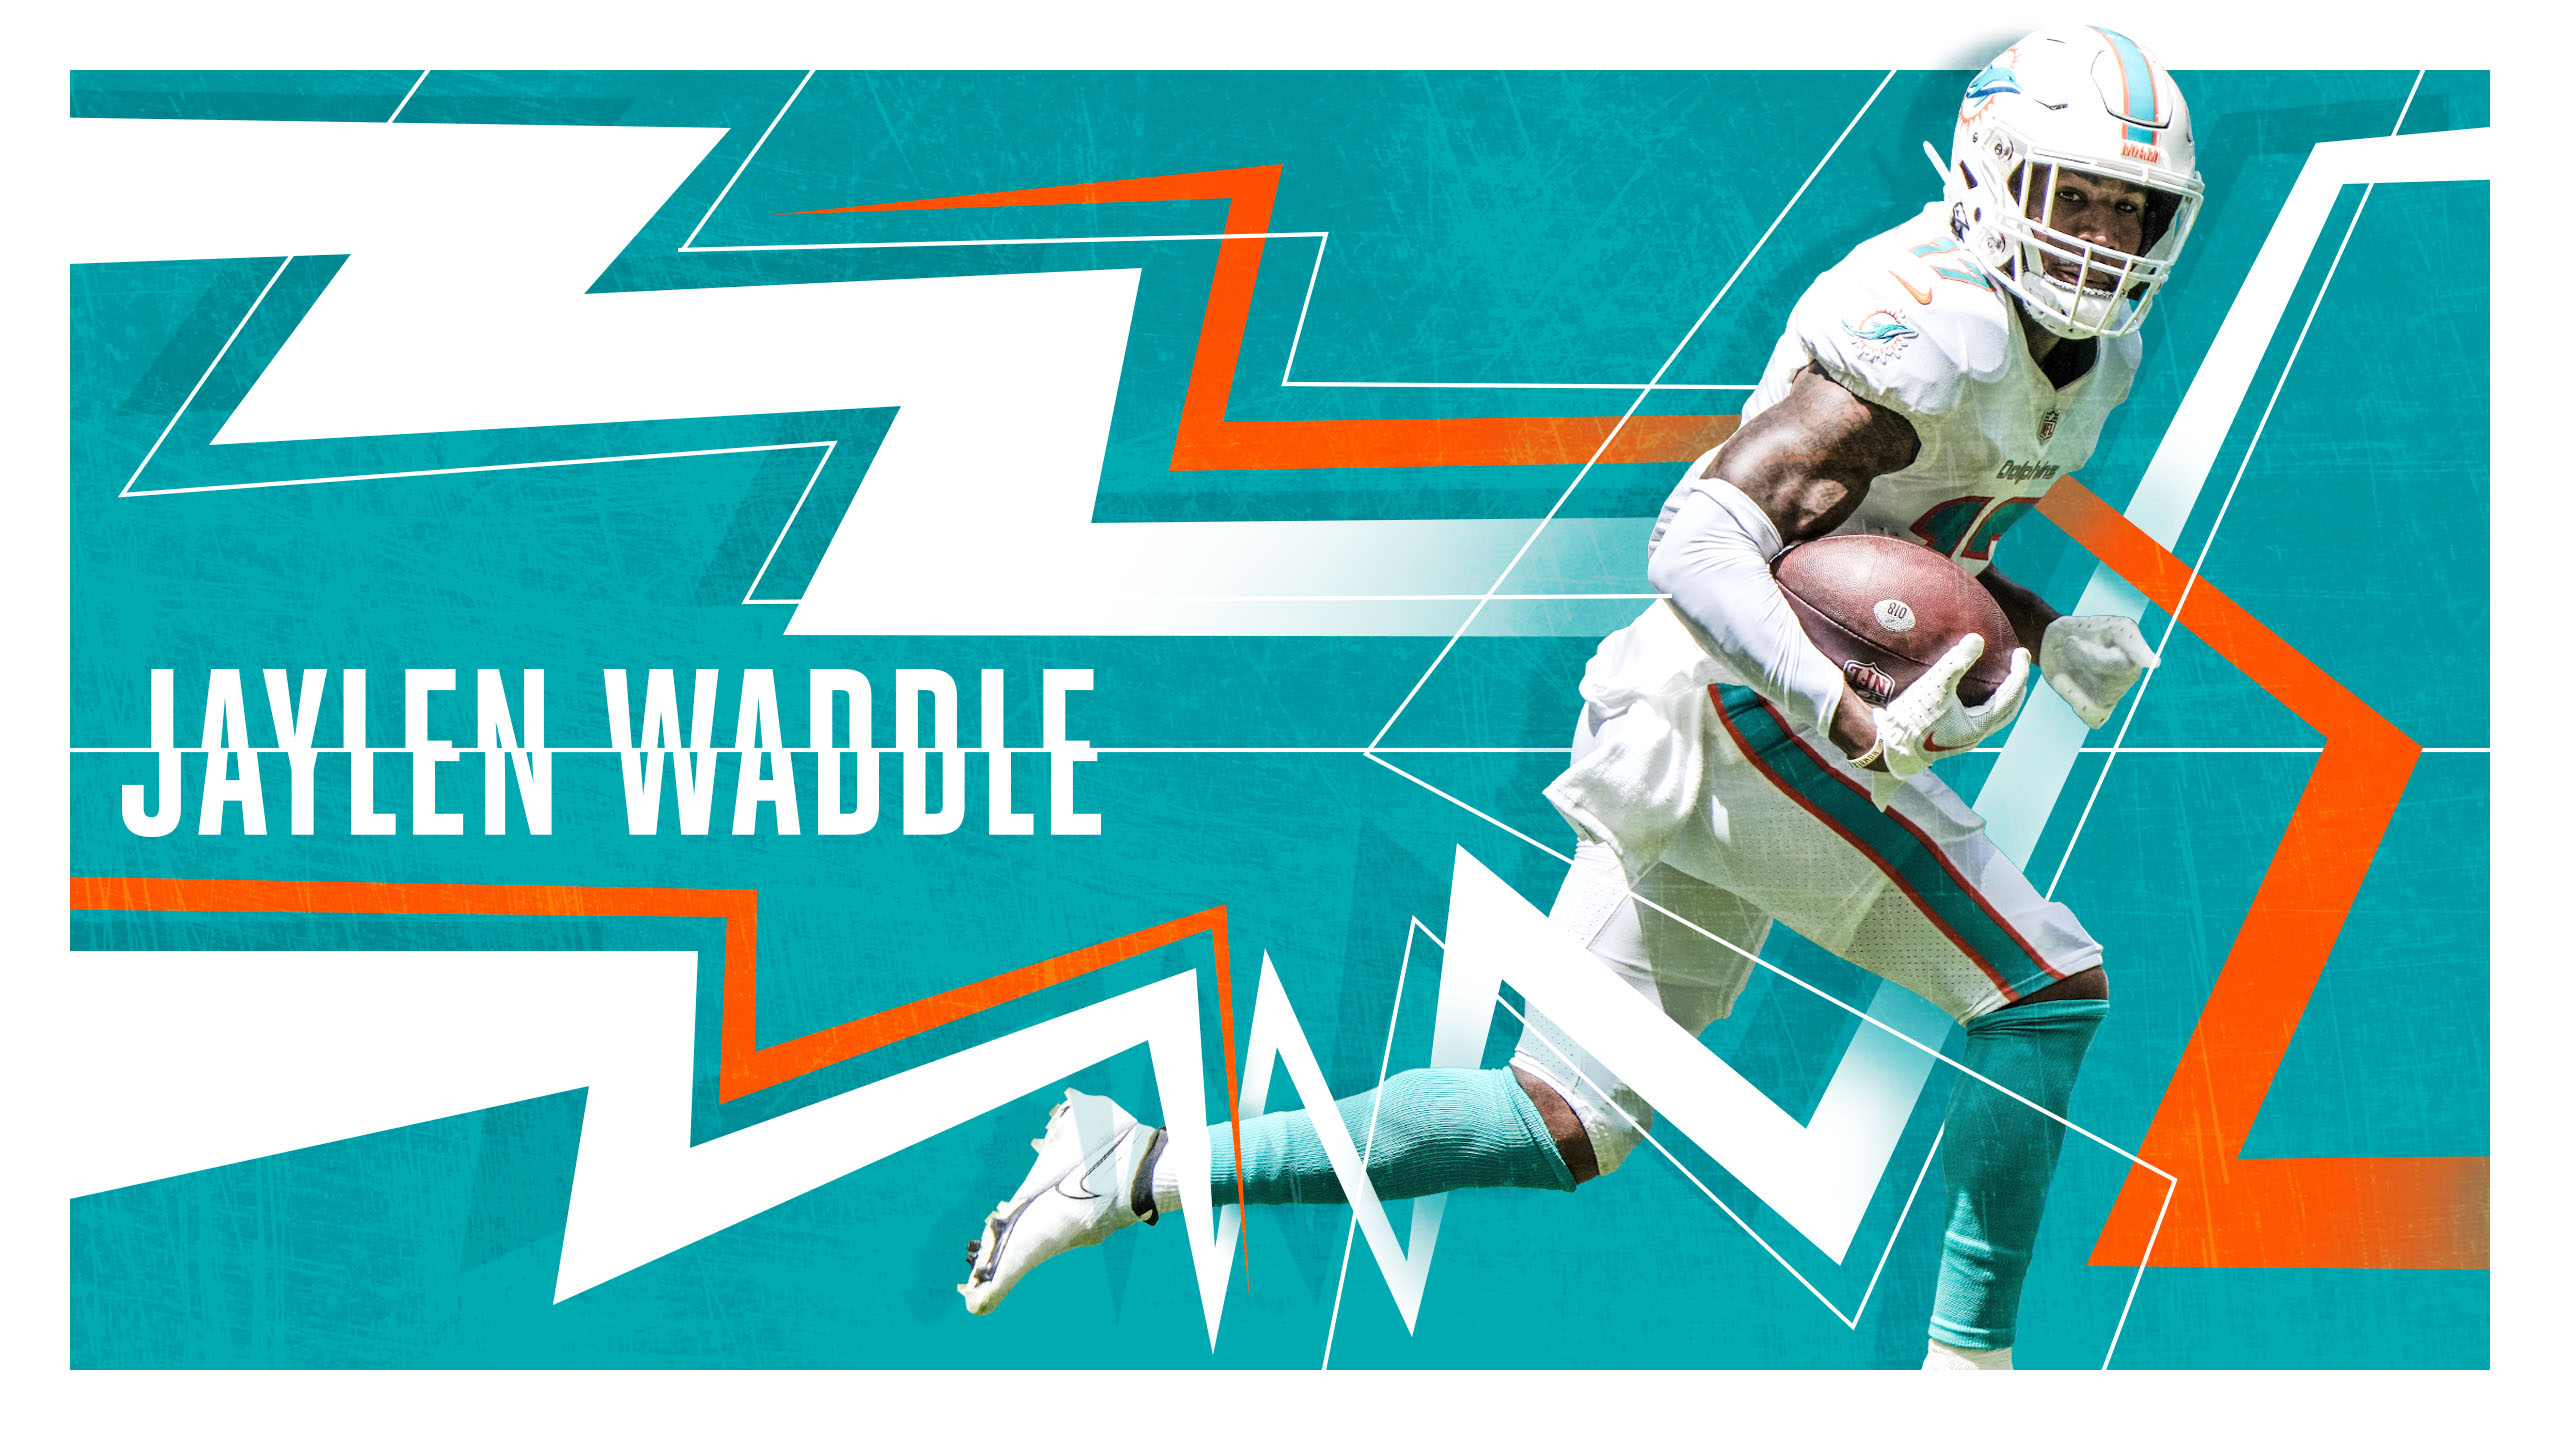 Dolphins Wallpapers | Miami Dolphins 